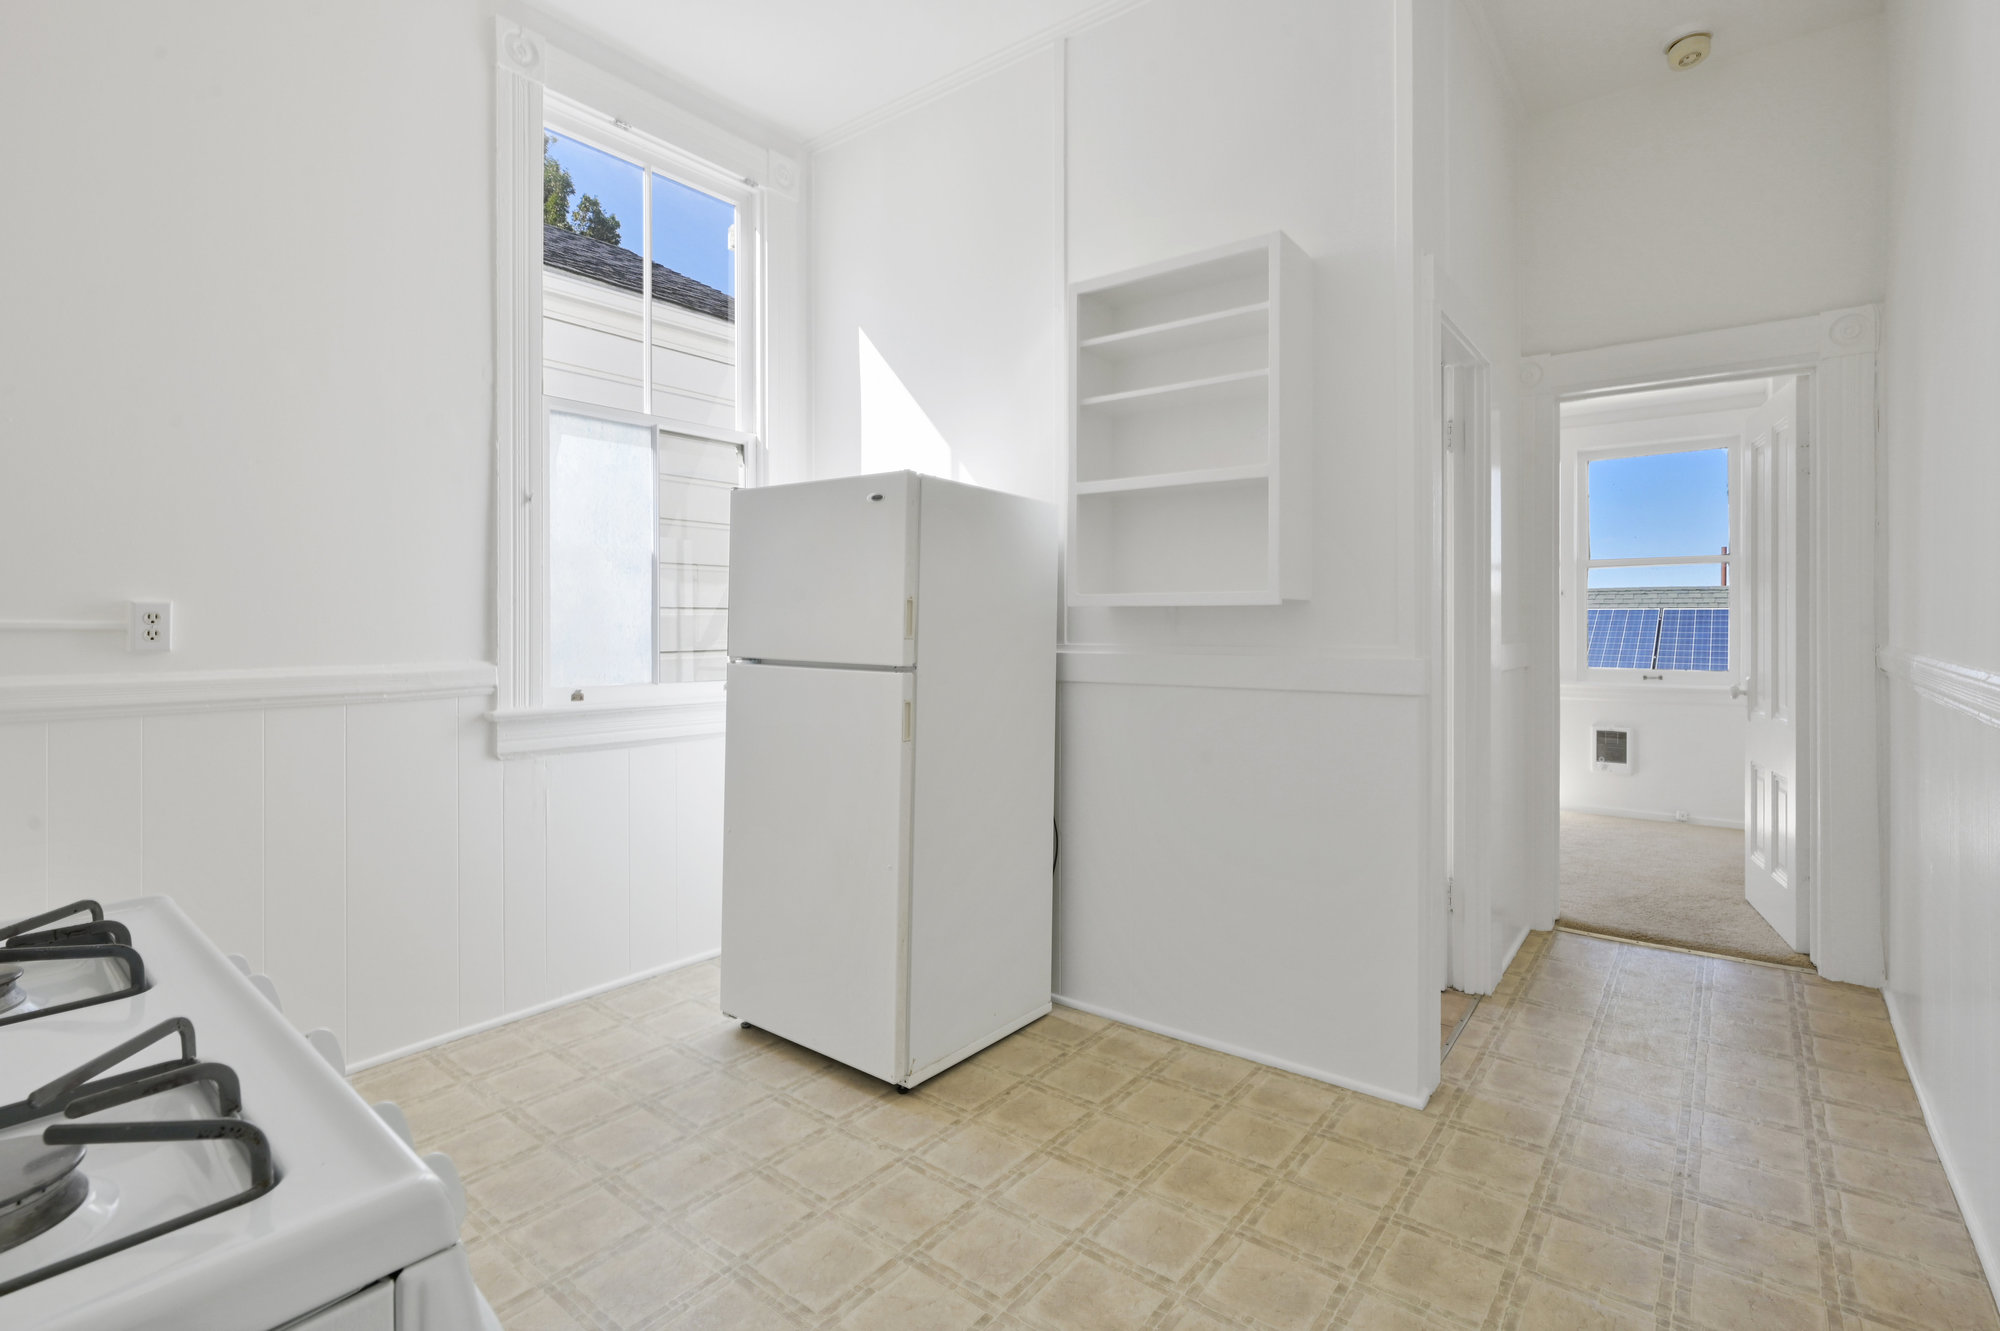 Property Photo: View of a kitchen, showing a fridge and windows